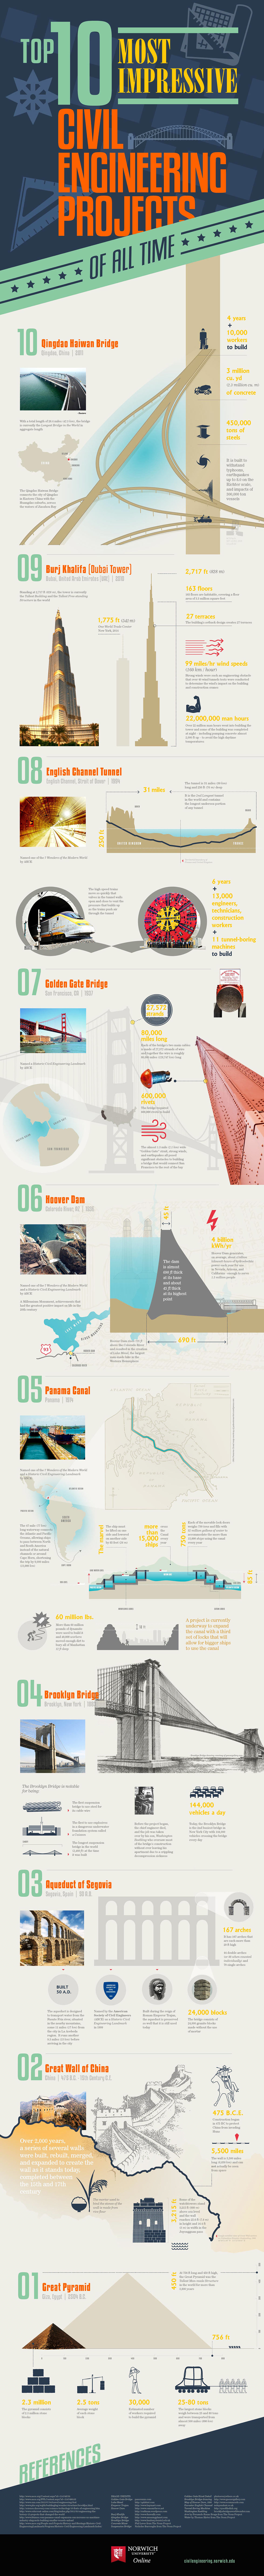 10 Greatest Projects of Civil Engineering Infographic